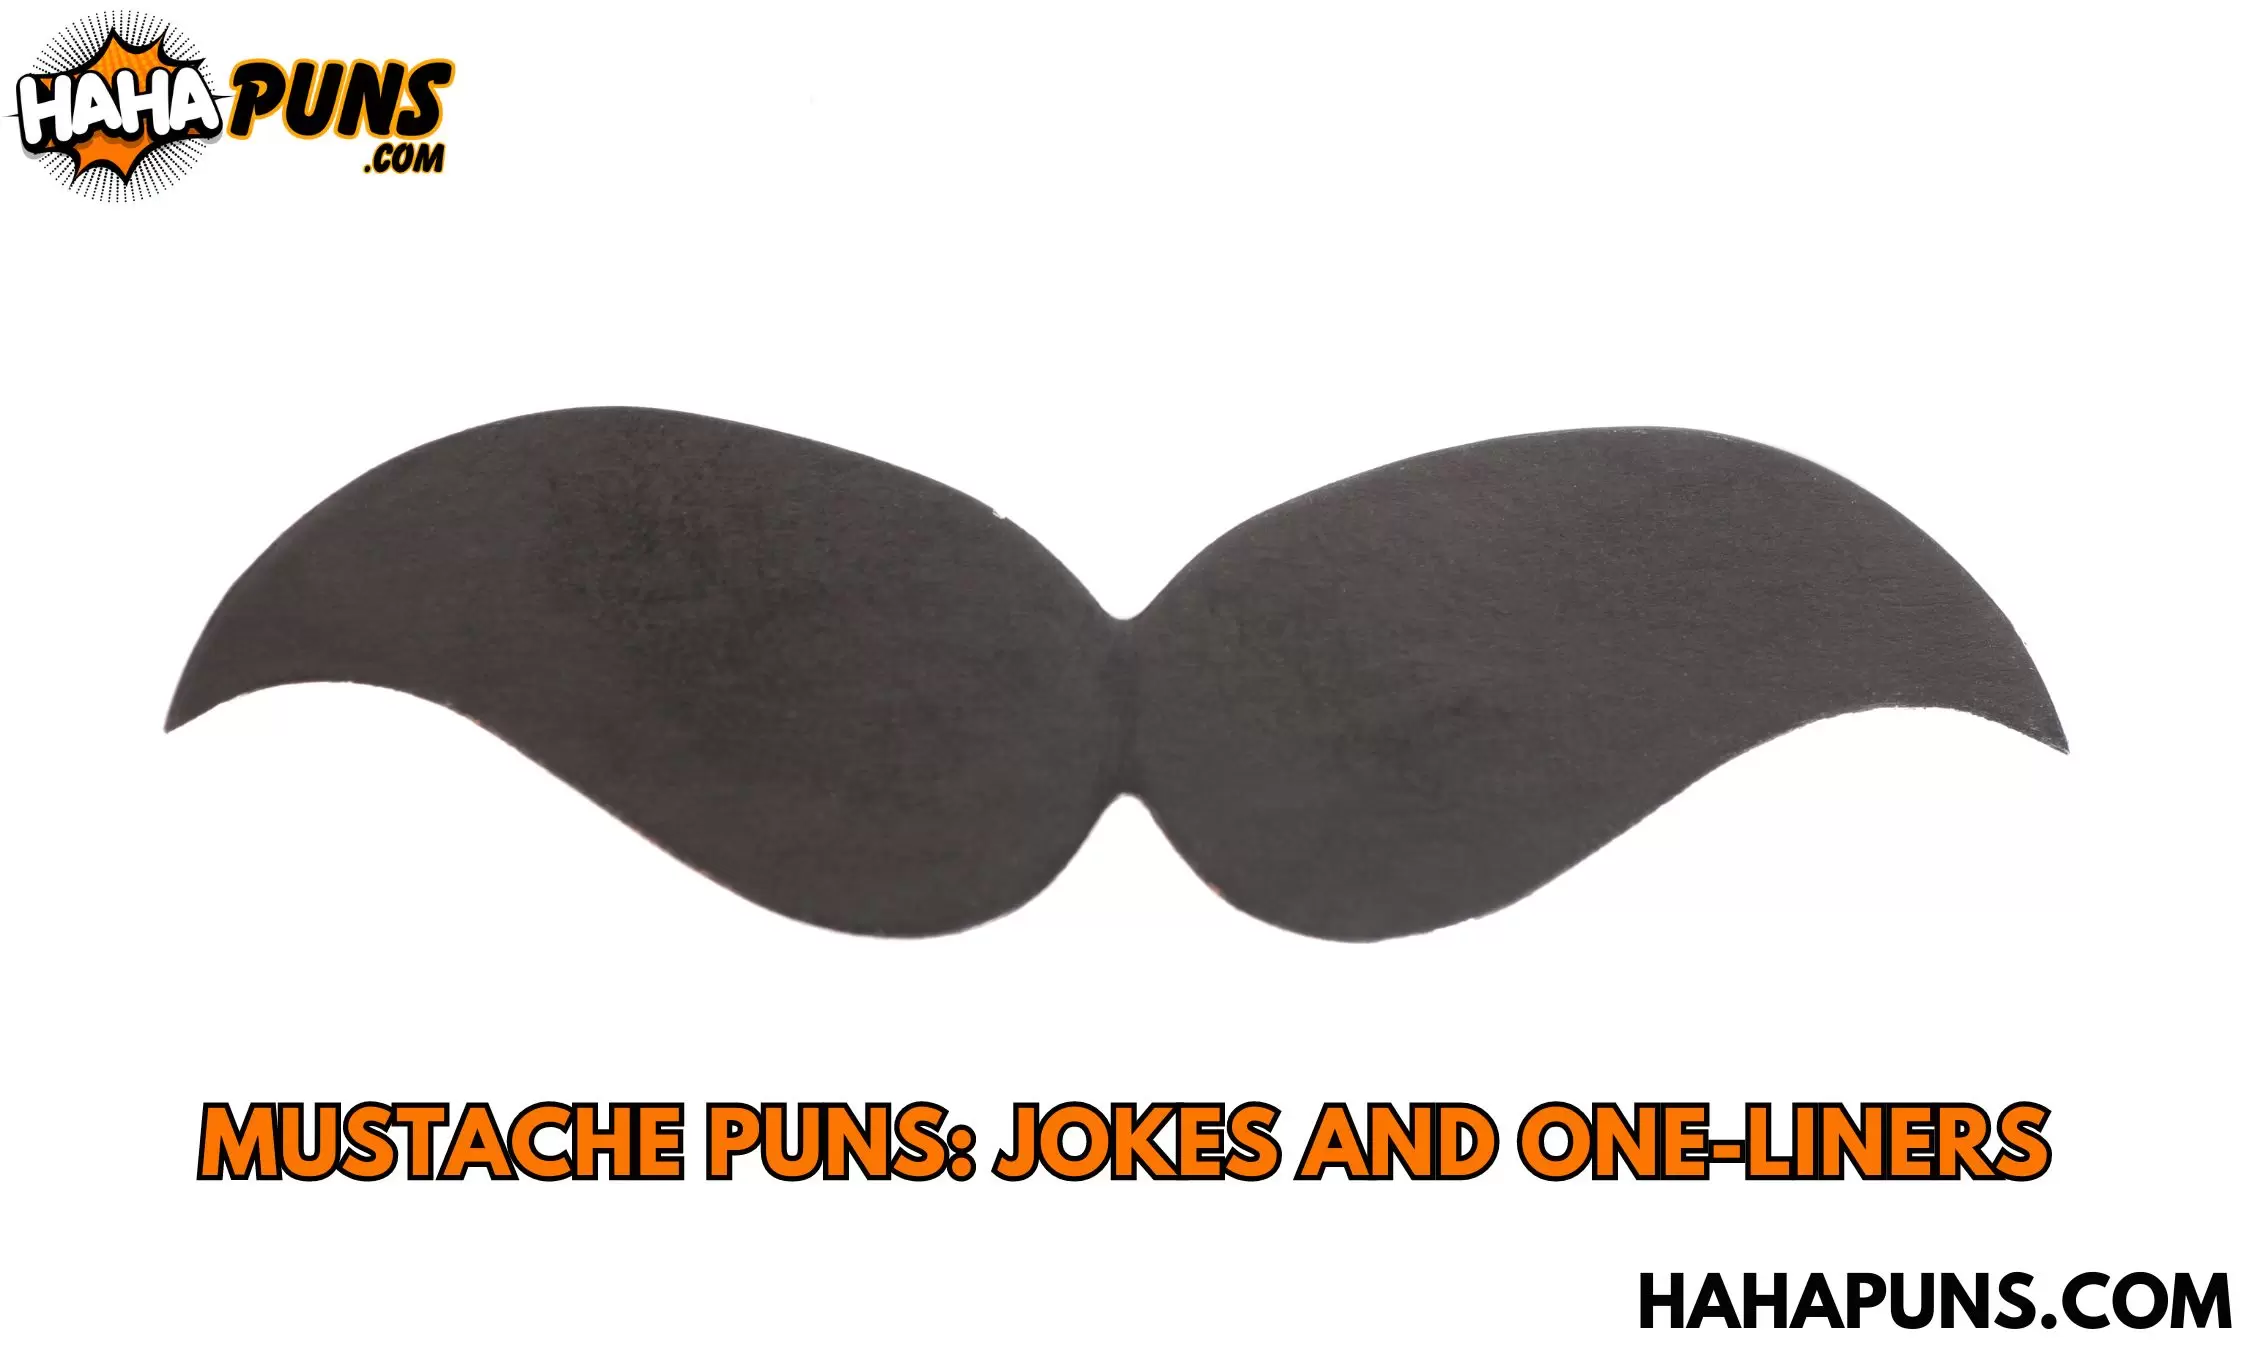 Mustache Puns: Jokes And One-Liners